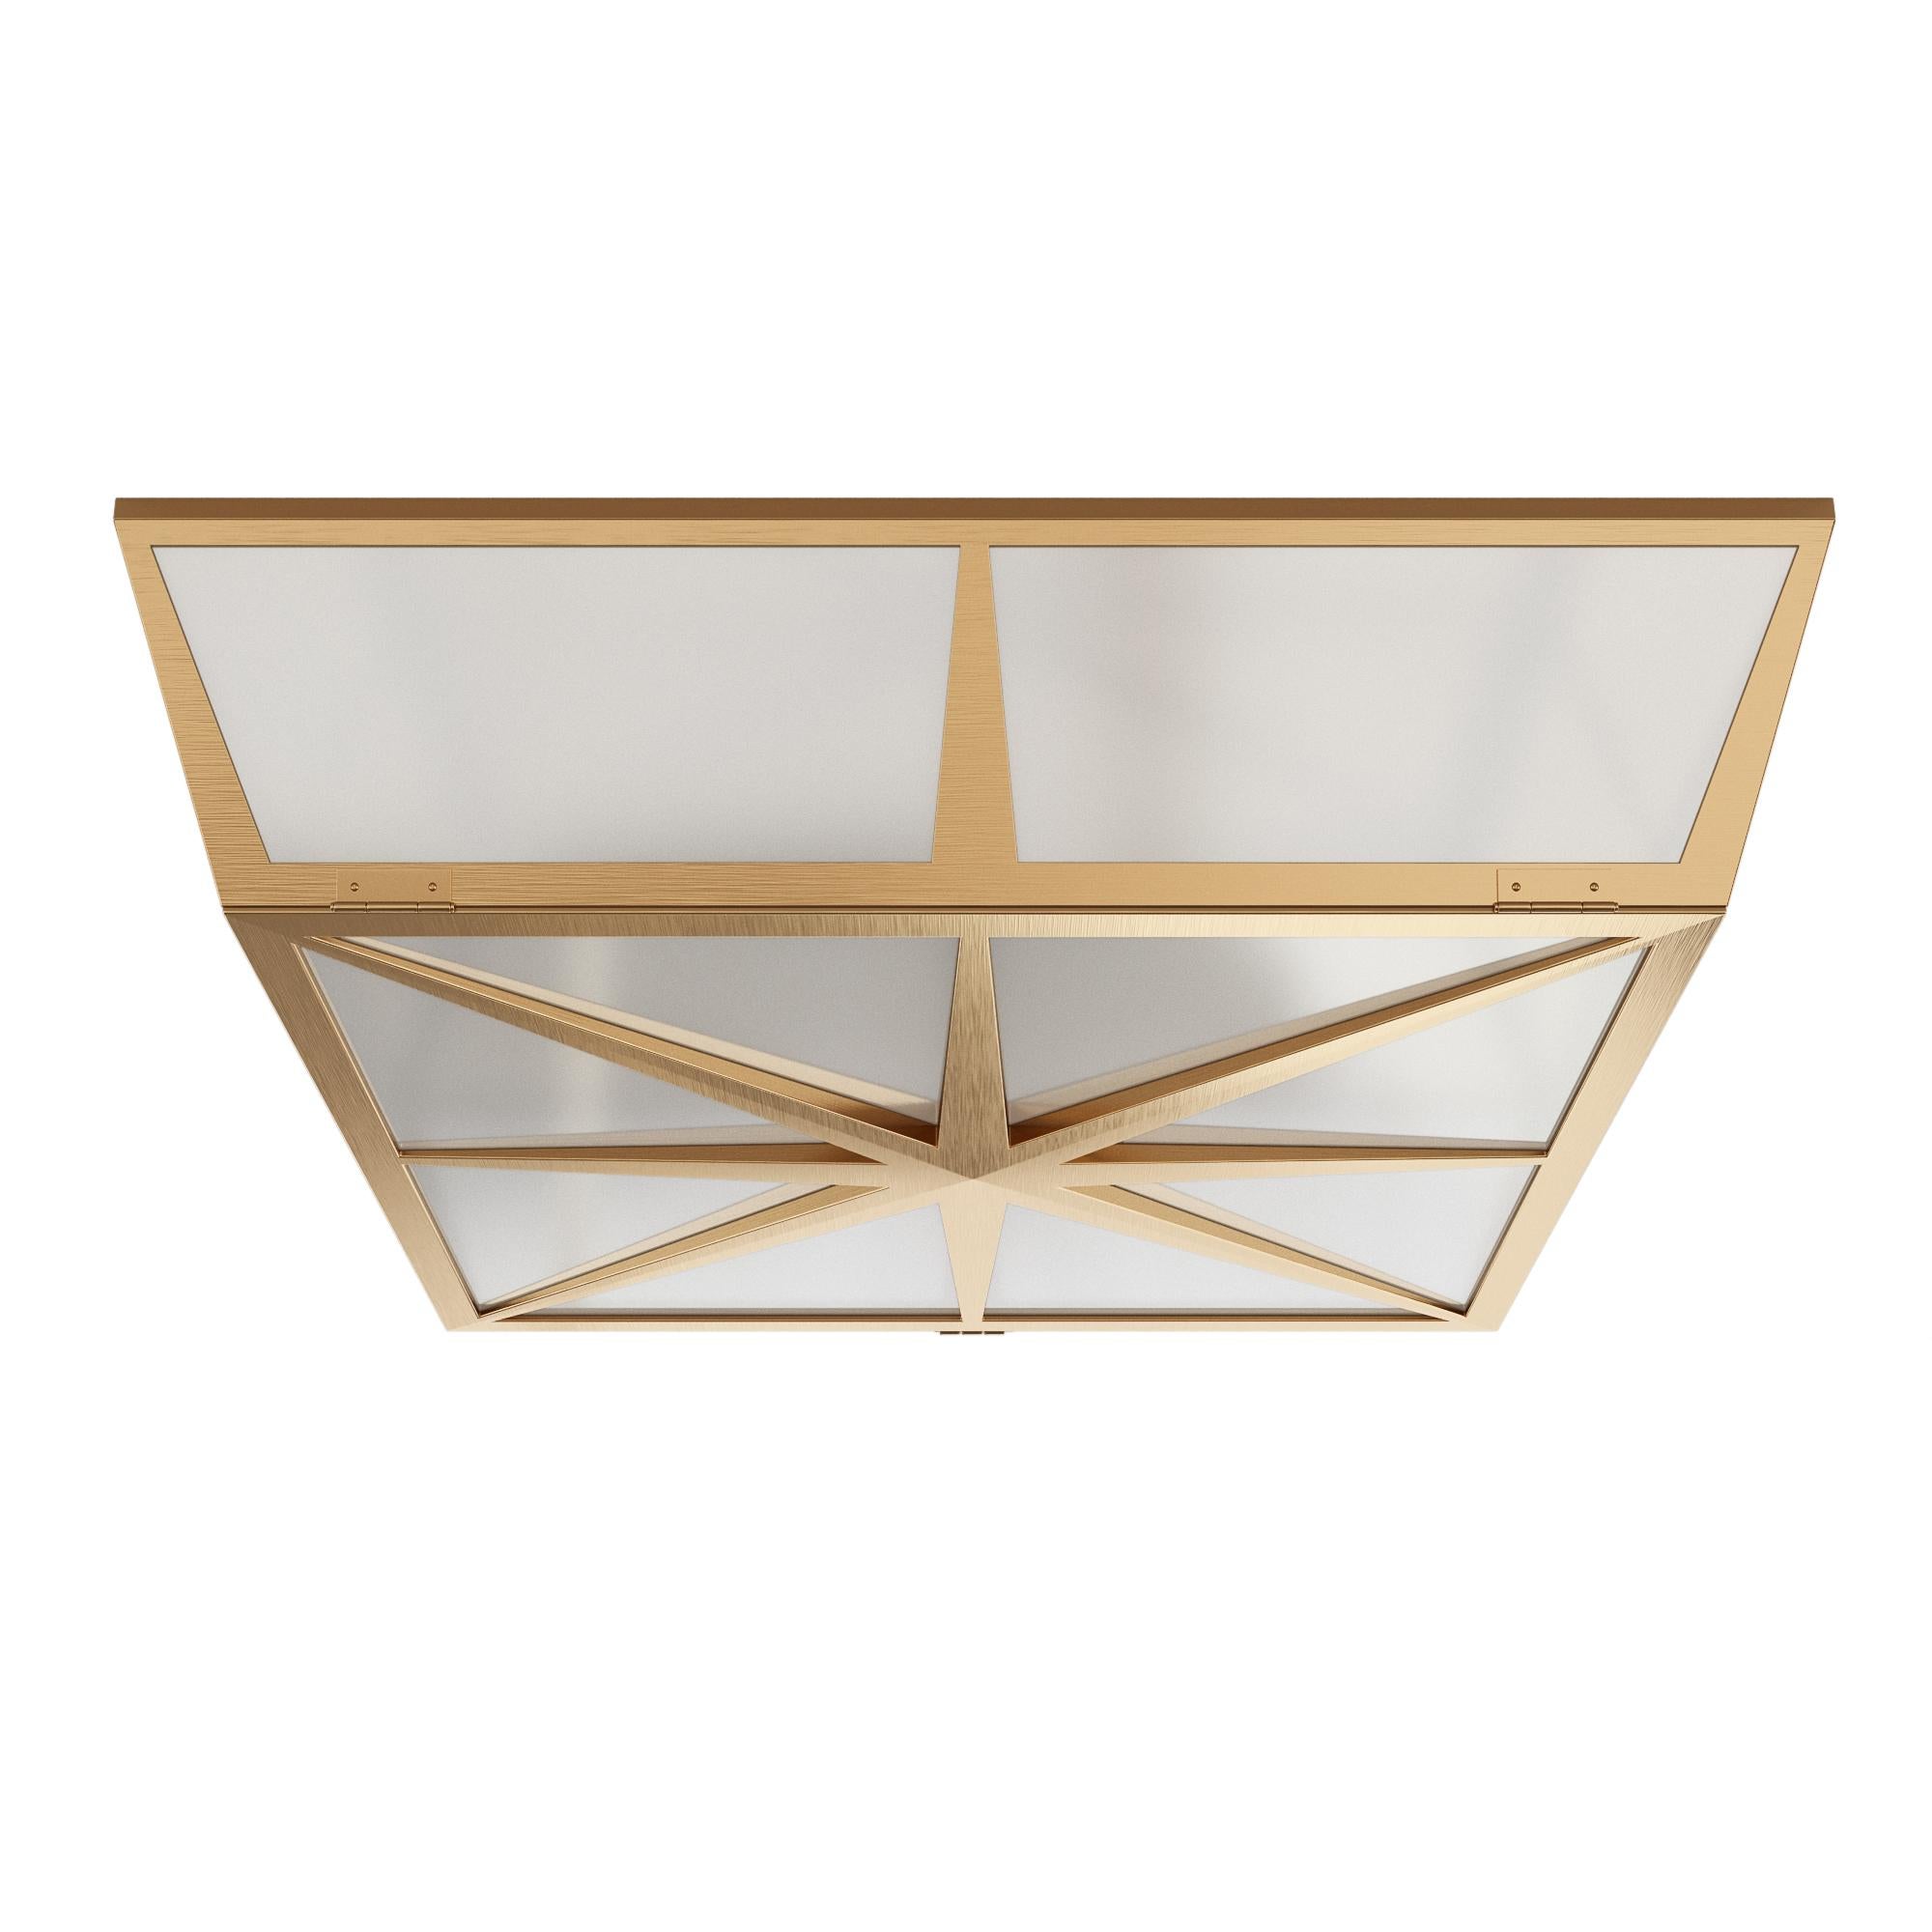 A square flush mount designed by David Duncan. This flush mount light fixture features a lightly antiqued brass patina, subtle, tapered sides and white opal acrylic diffusers. A raised, star compass motif is illustrated on the underside. A hinge and